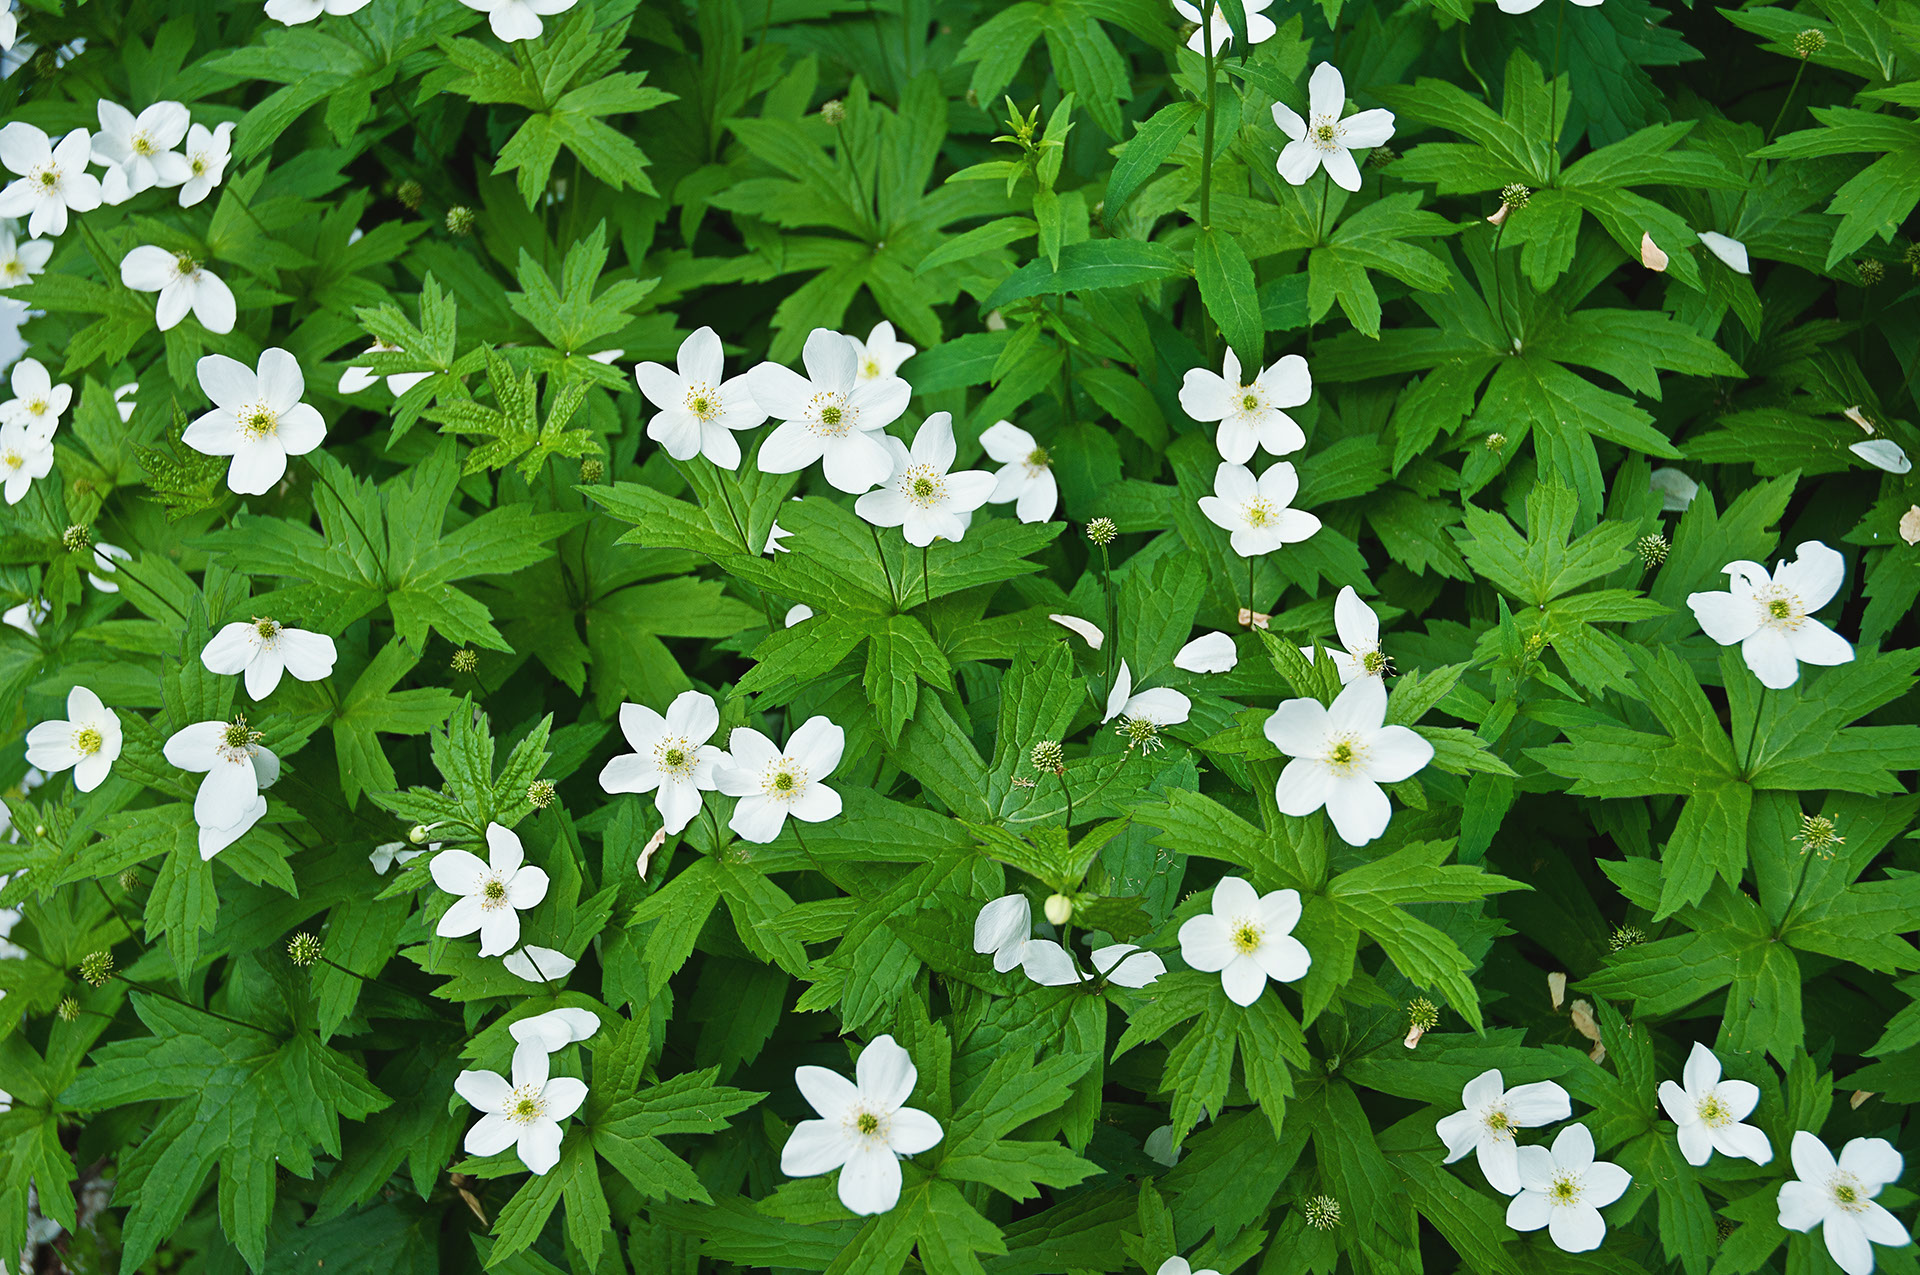 15 Best Ground Cover Plants For Shade, Best Perennial Ground Cover For Shade